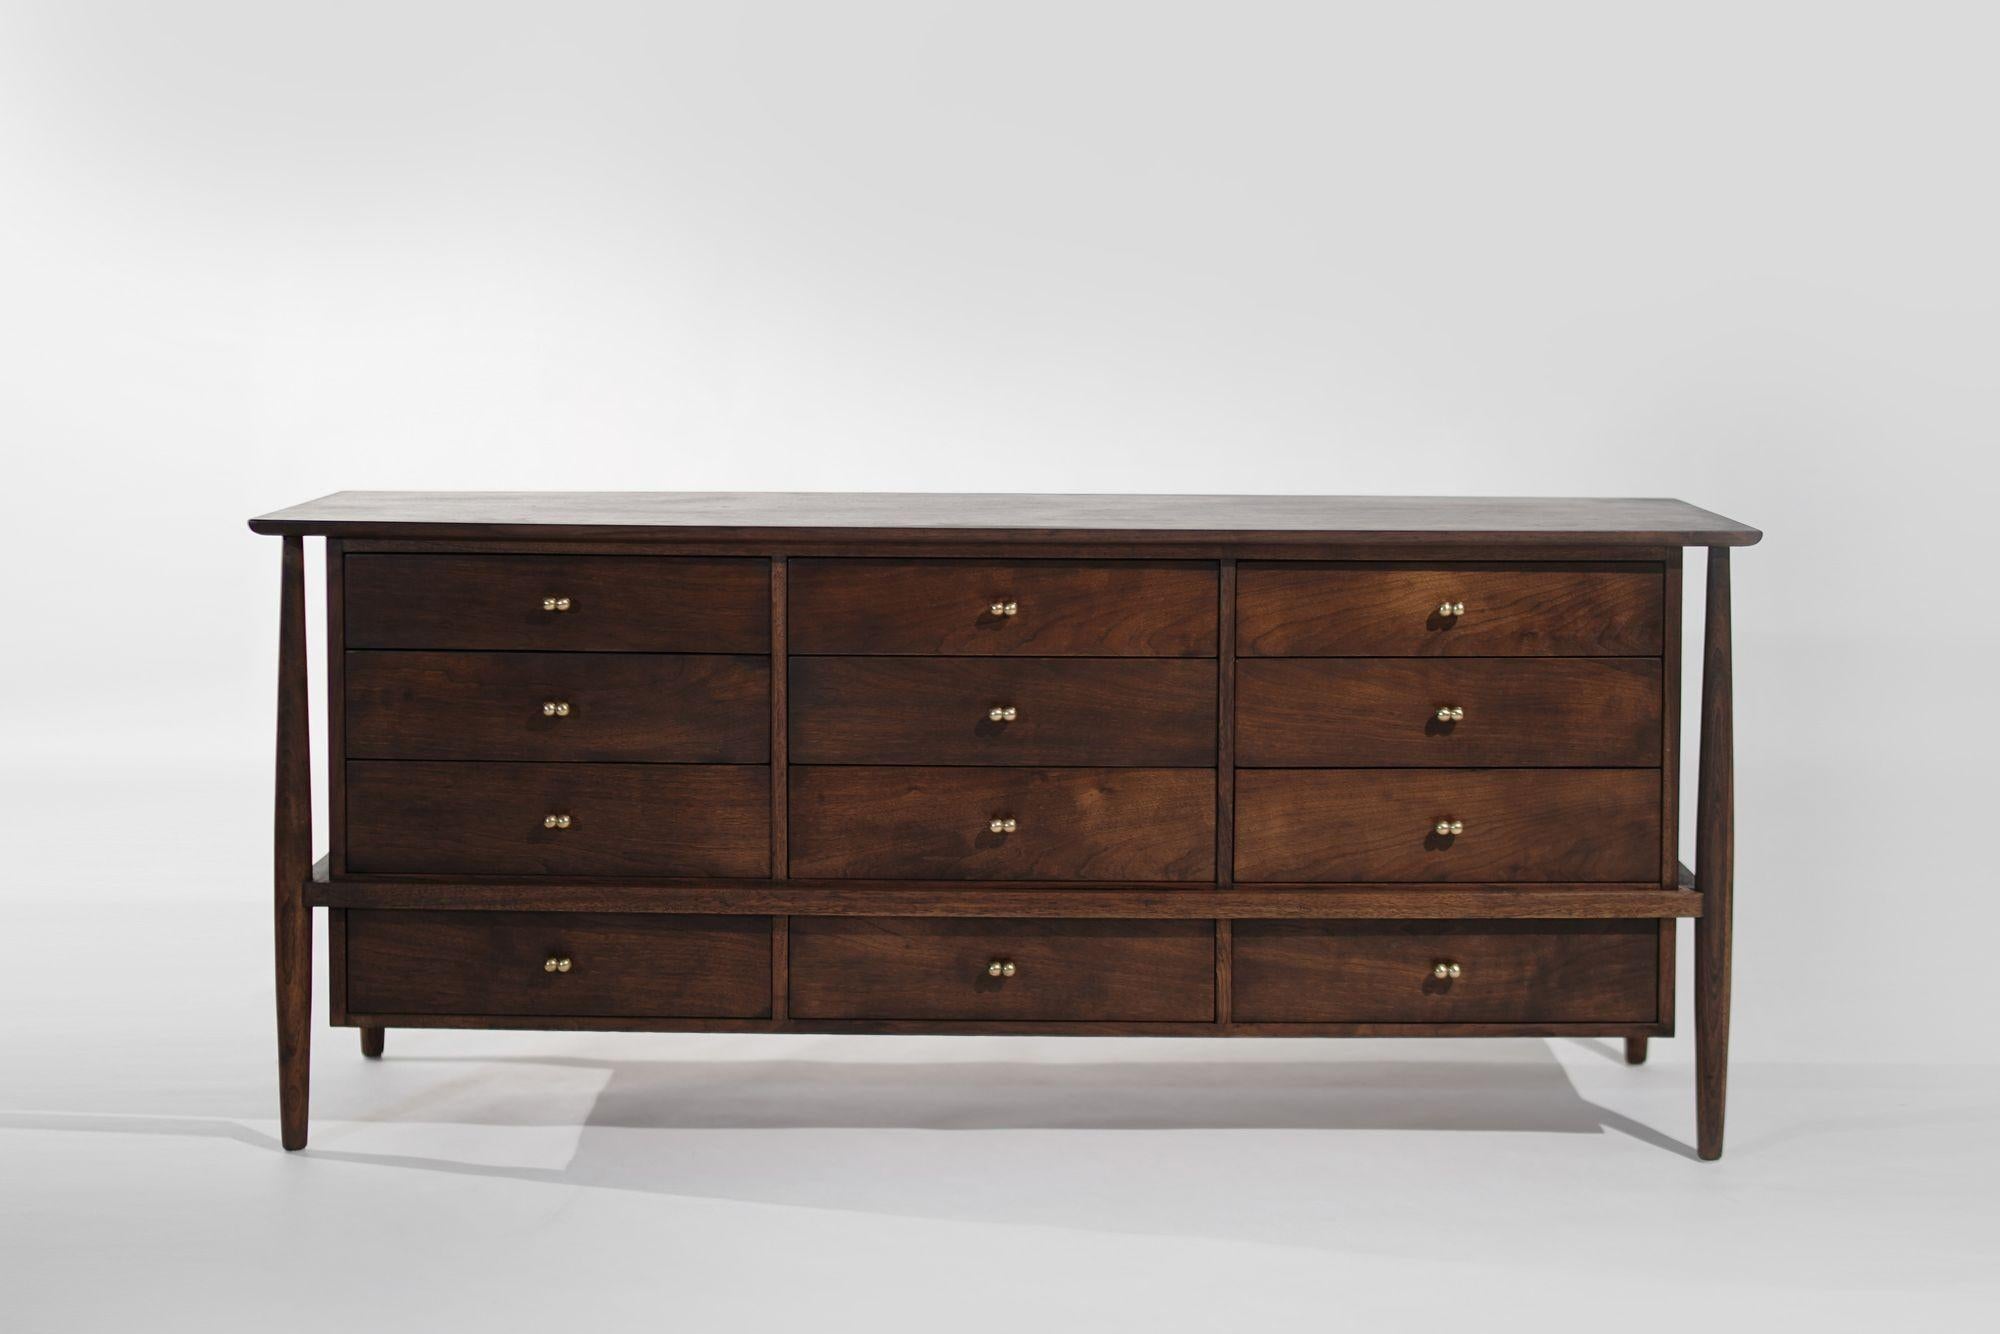 Mid-century Modern dresser in walnut by John Stuart, circa 1950-1950. This stunning piece showcases an elegant exposed framework, twelve spacious drawers, and luxurious brass hardware, blending timeless design with functional beauty.